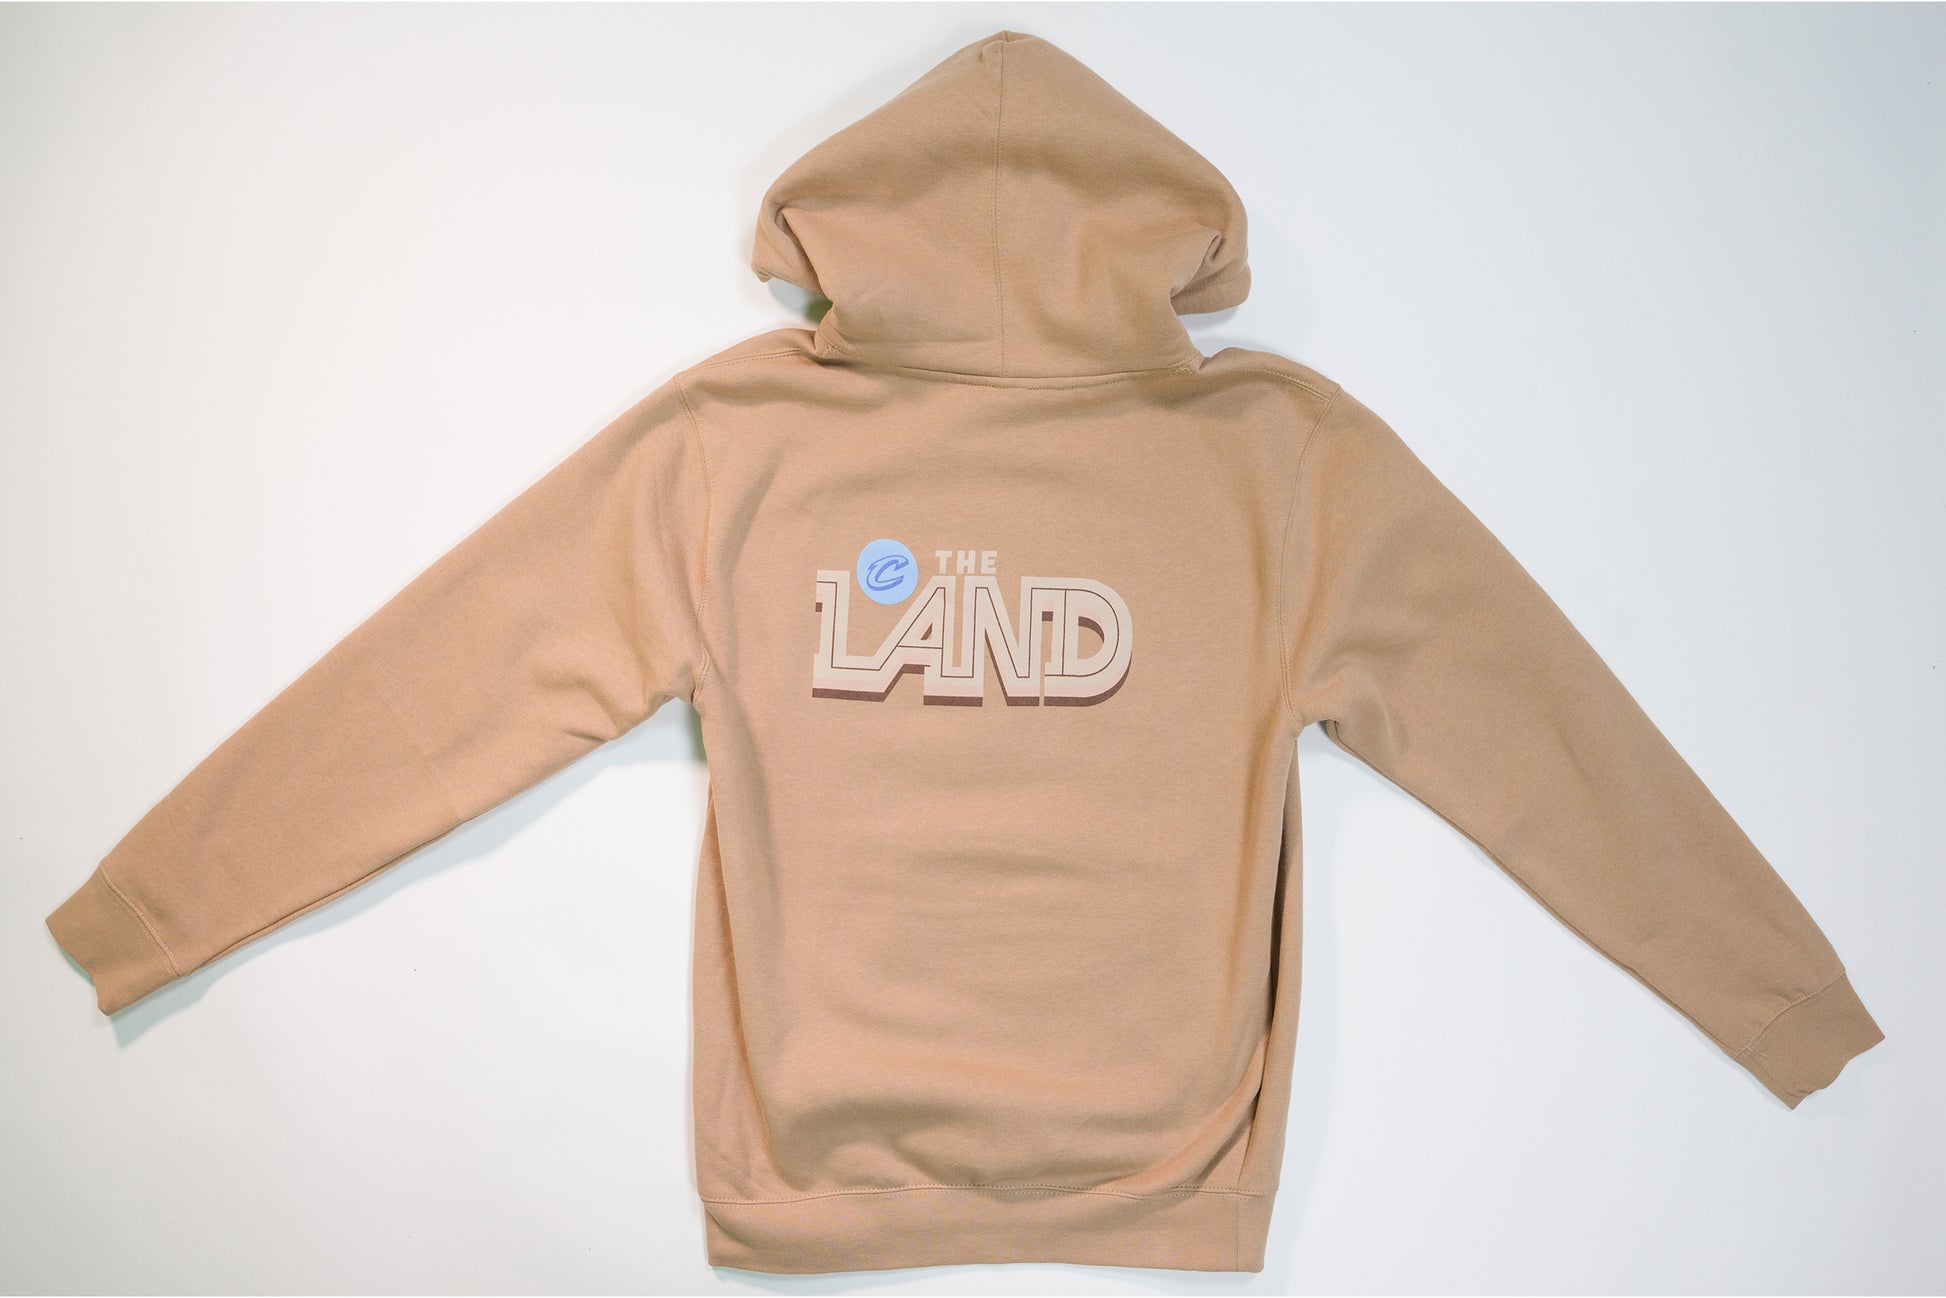 LC x Metroparks The Land Crew Sweatshirt in Tan Size Small | Cavaliers